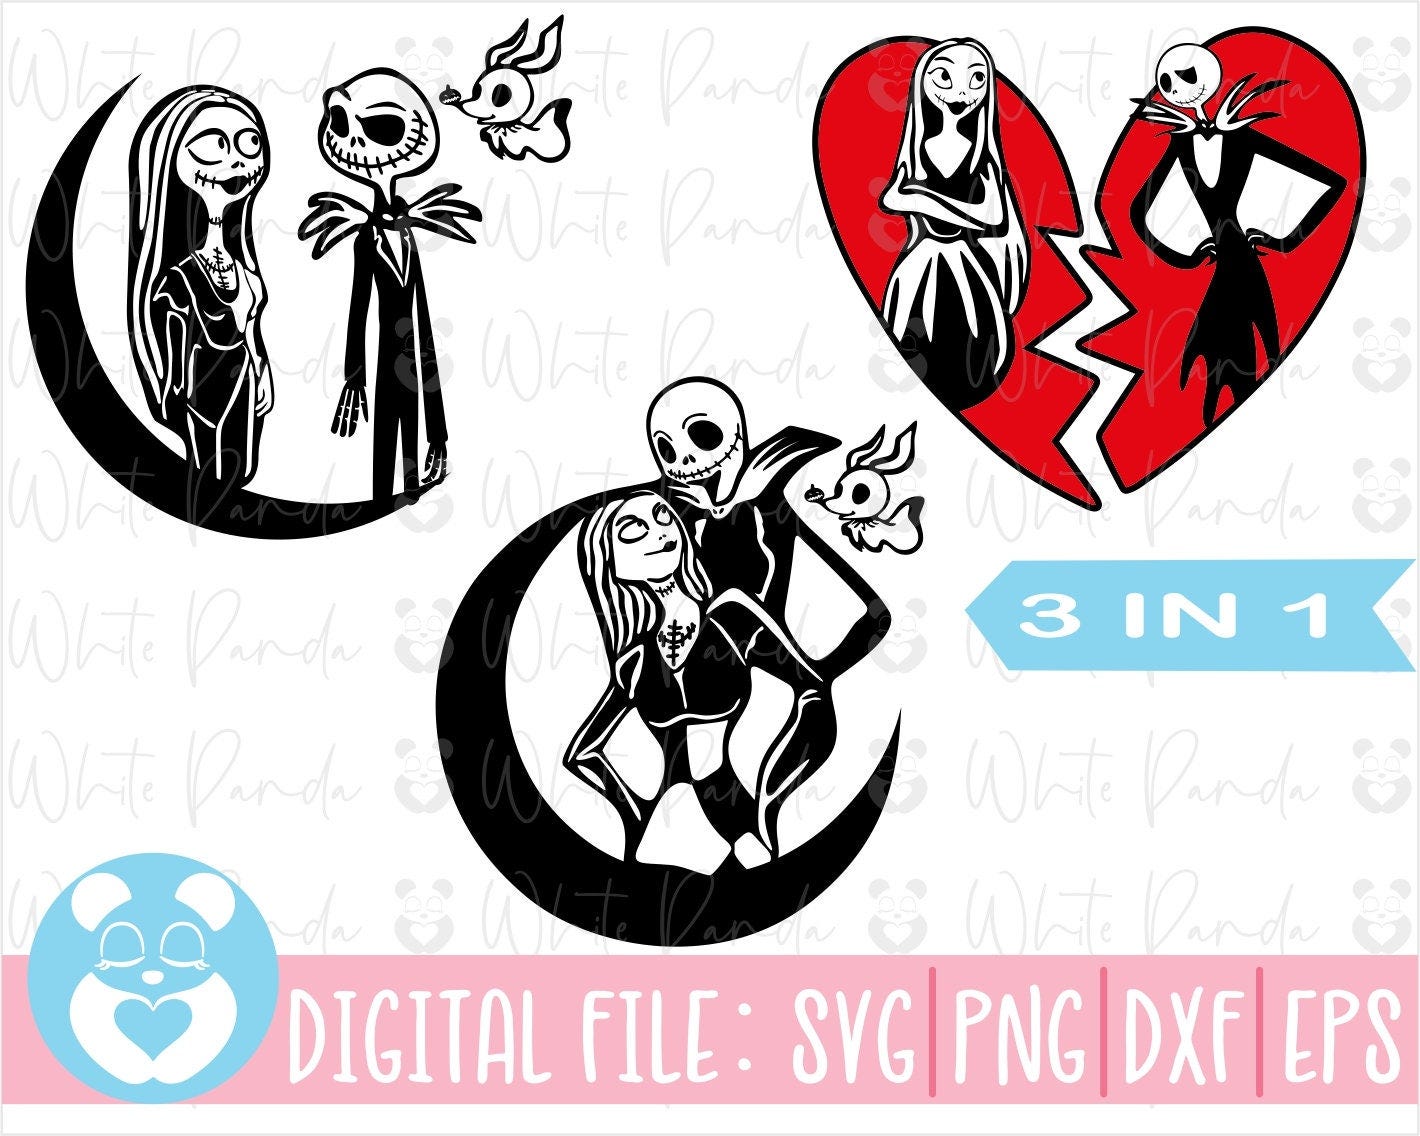 Jack and Sally Svg, Sally Svg, Jack Skellington Svg, The Nightmare Before Christmas Svg,Files for Cricut,Silhouette,Instant Download,Dxf,Png